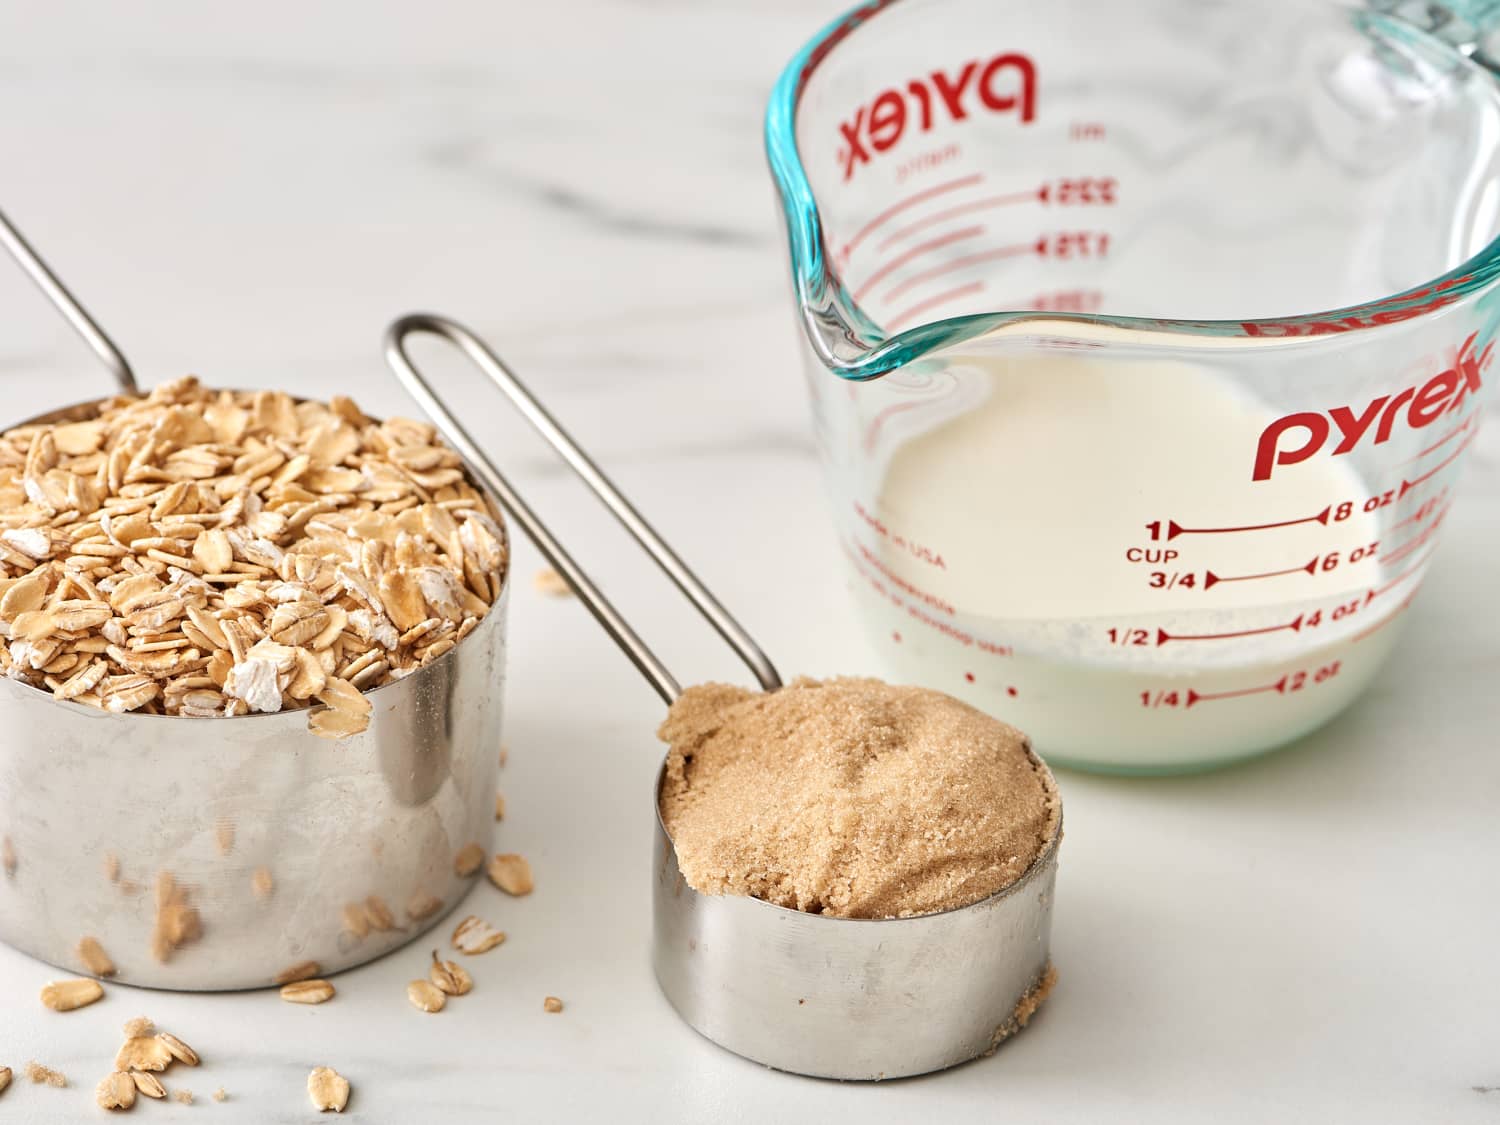 Buy The Oval Measuring Cups For Accurate Results 